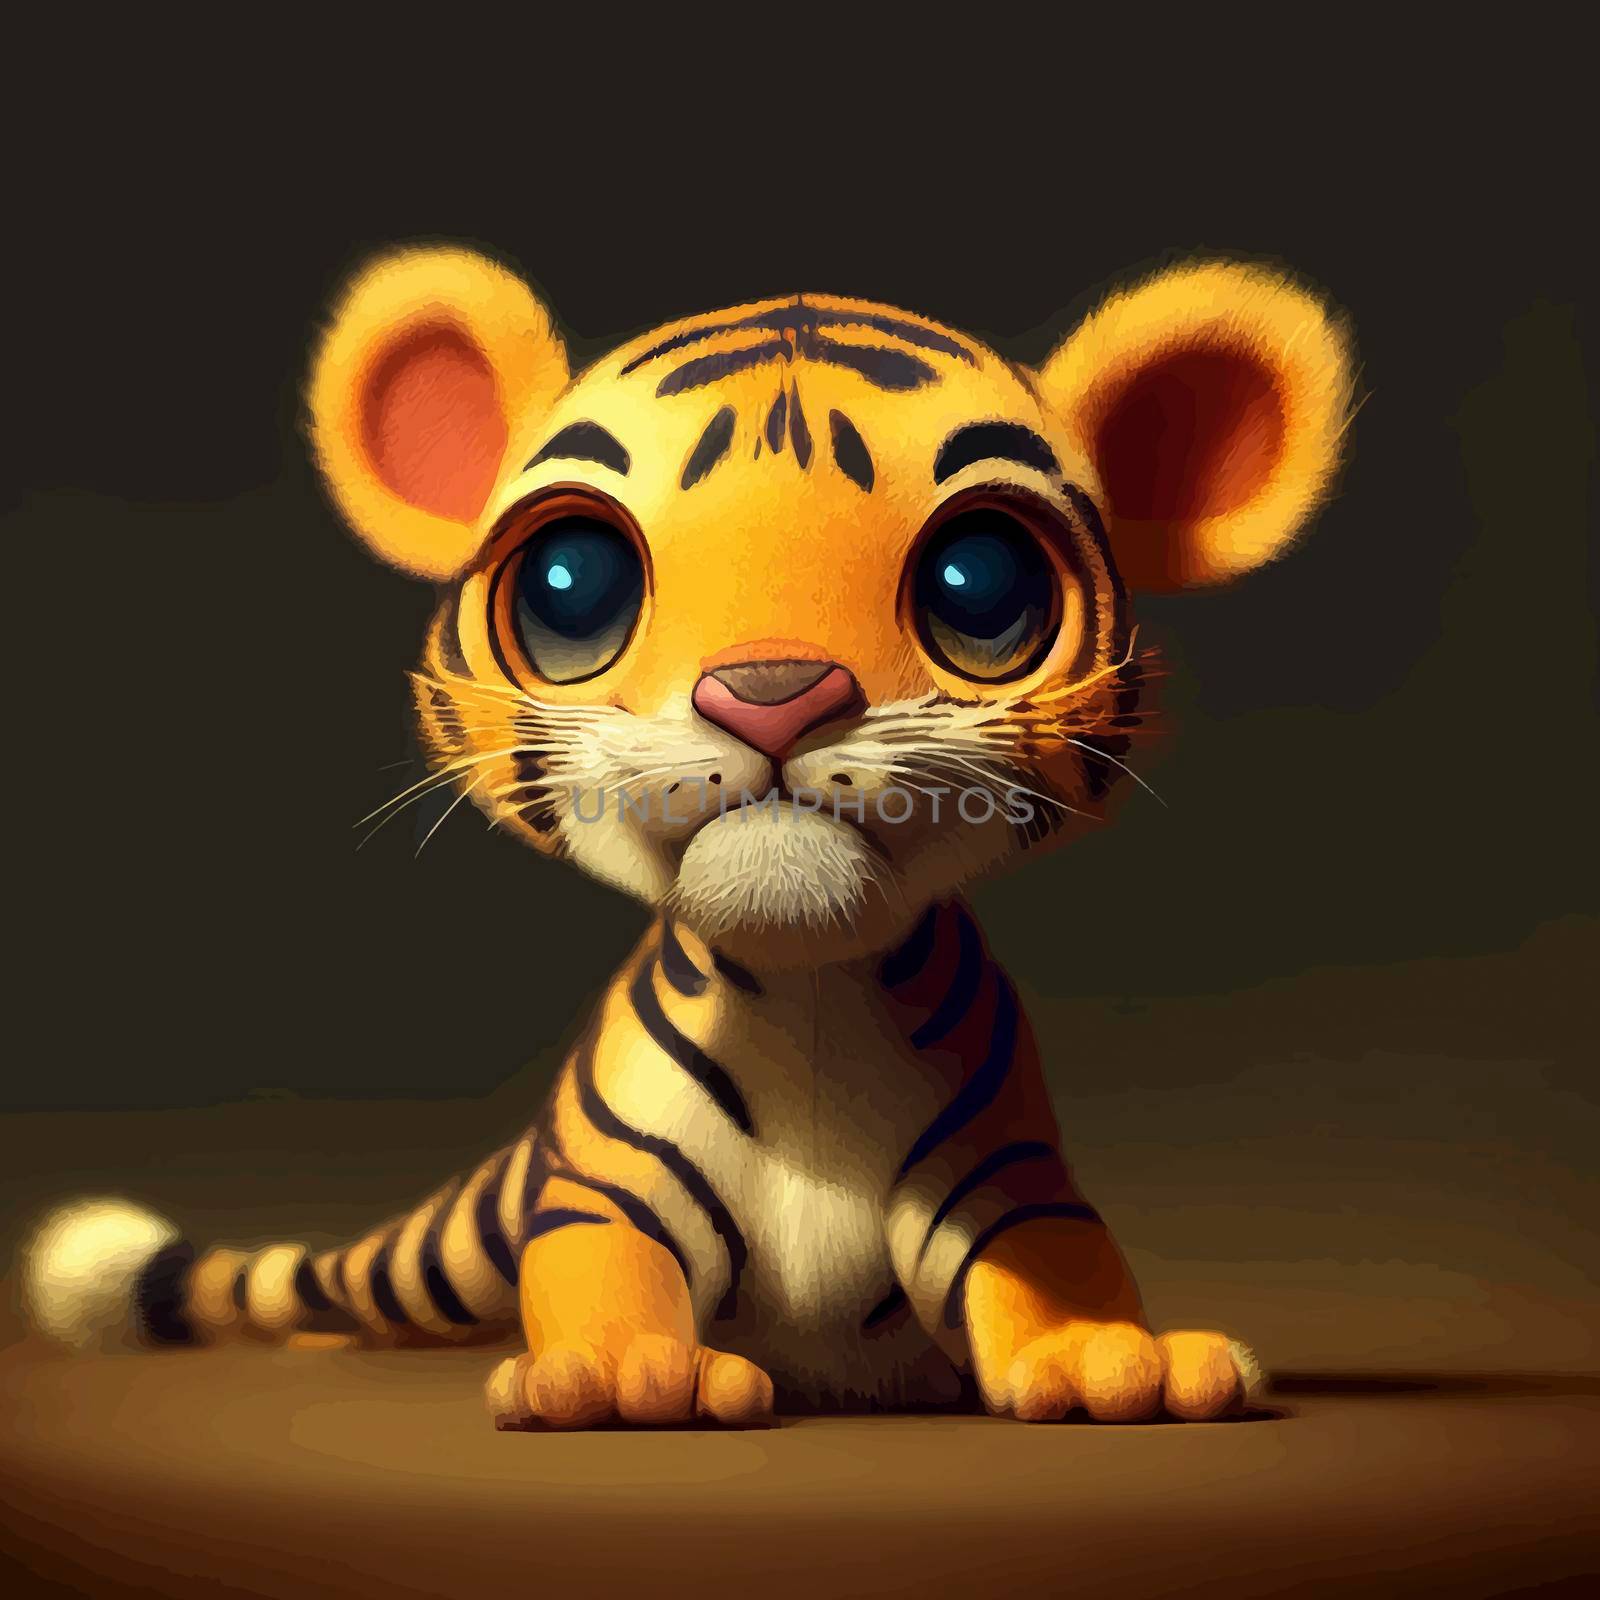 animated illustration of a cute tiger, animated baby tiger portrait by JpRamos